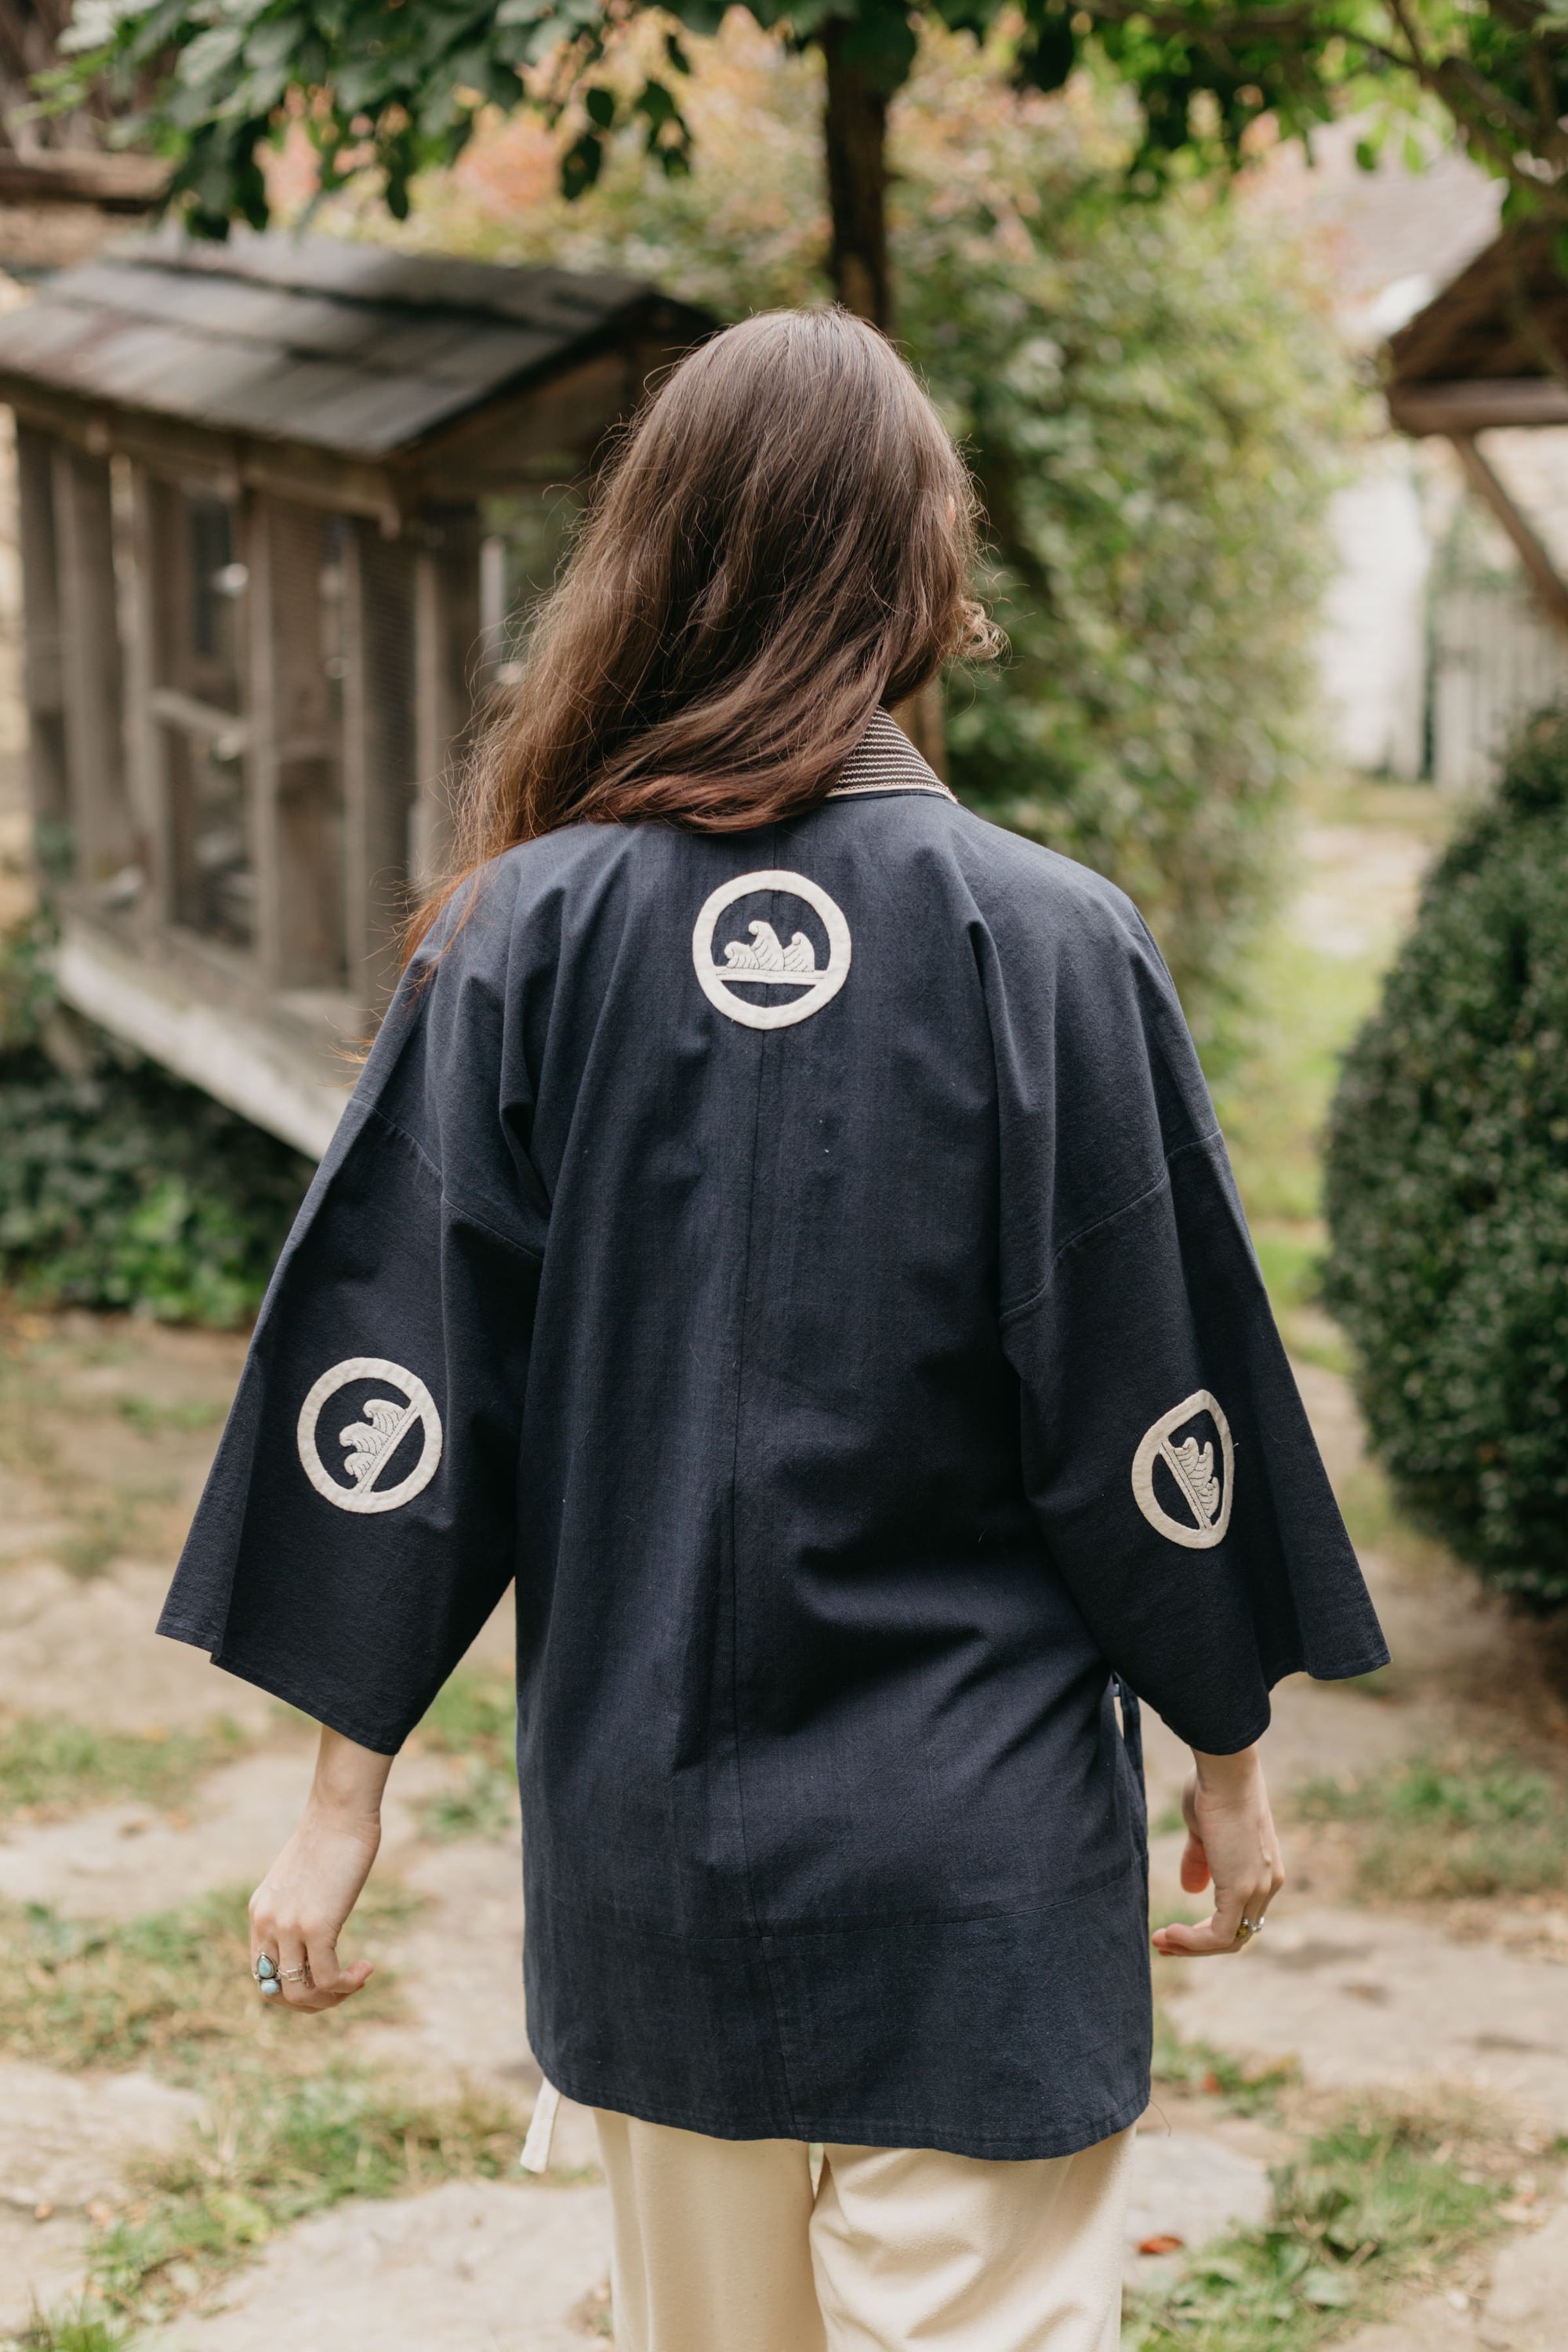 Japanese American woman wearing a navy Hippari with embroidery. Back View, outside by shrubs.  Woman is walking away.